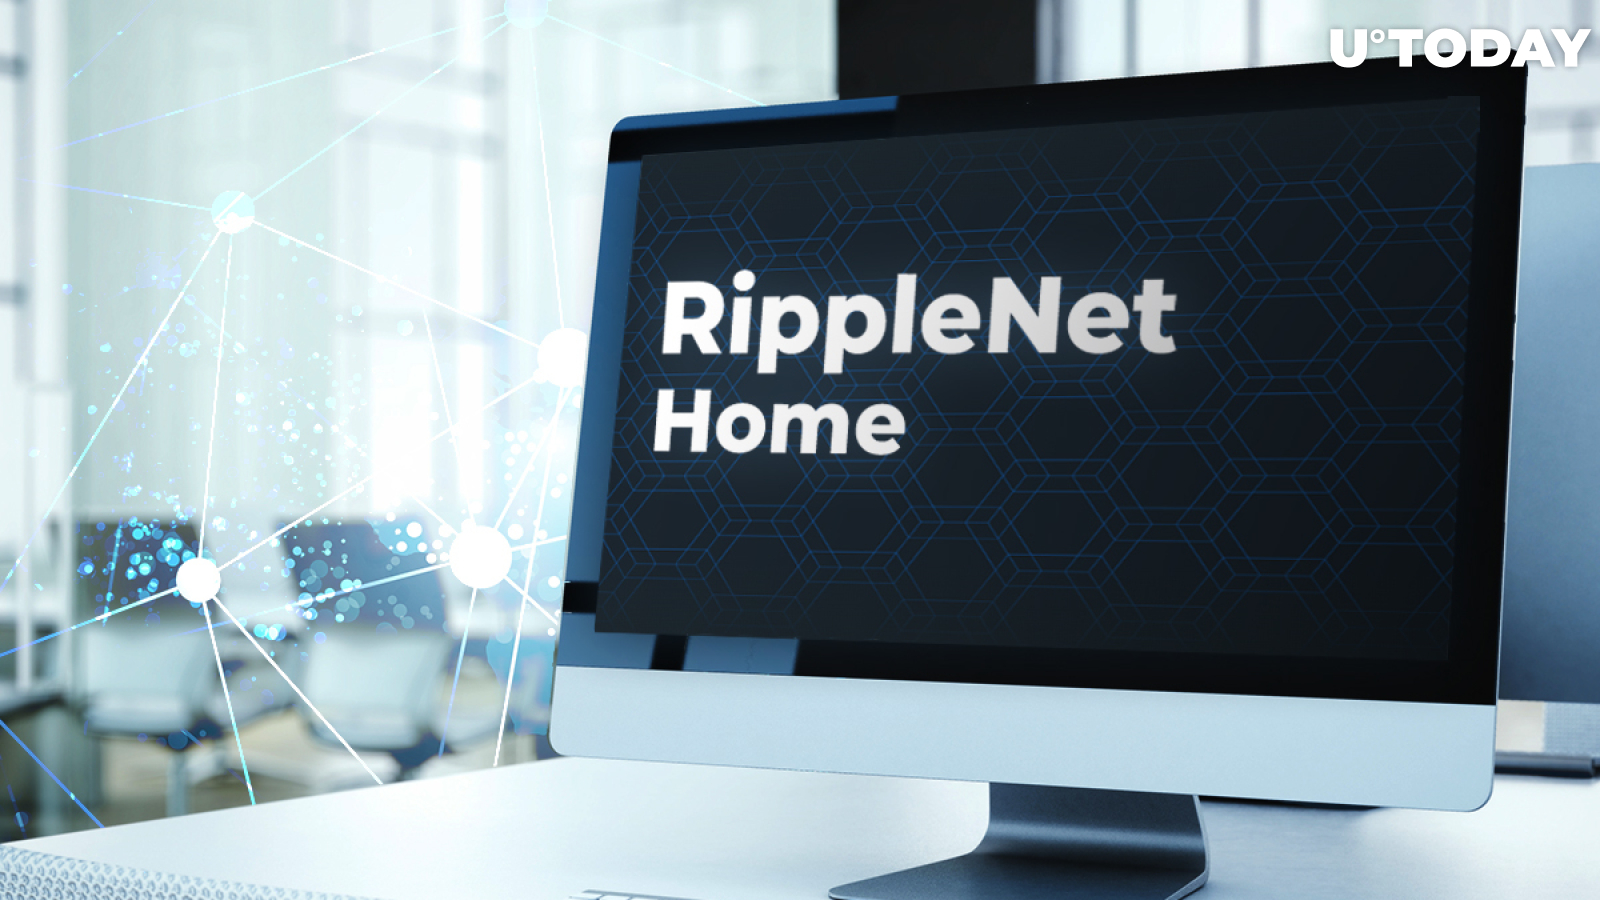 RippleNet Home: Ripple Introduces Revolutionary Product for Connecting Its Clients